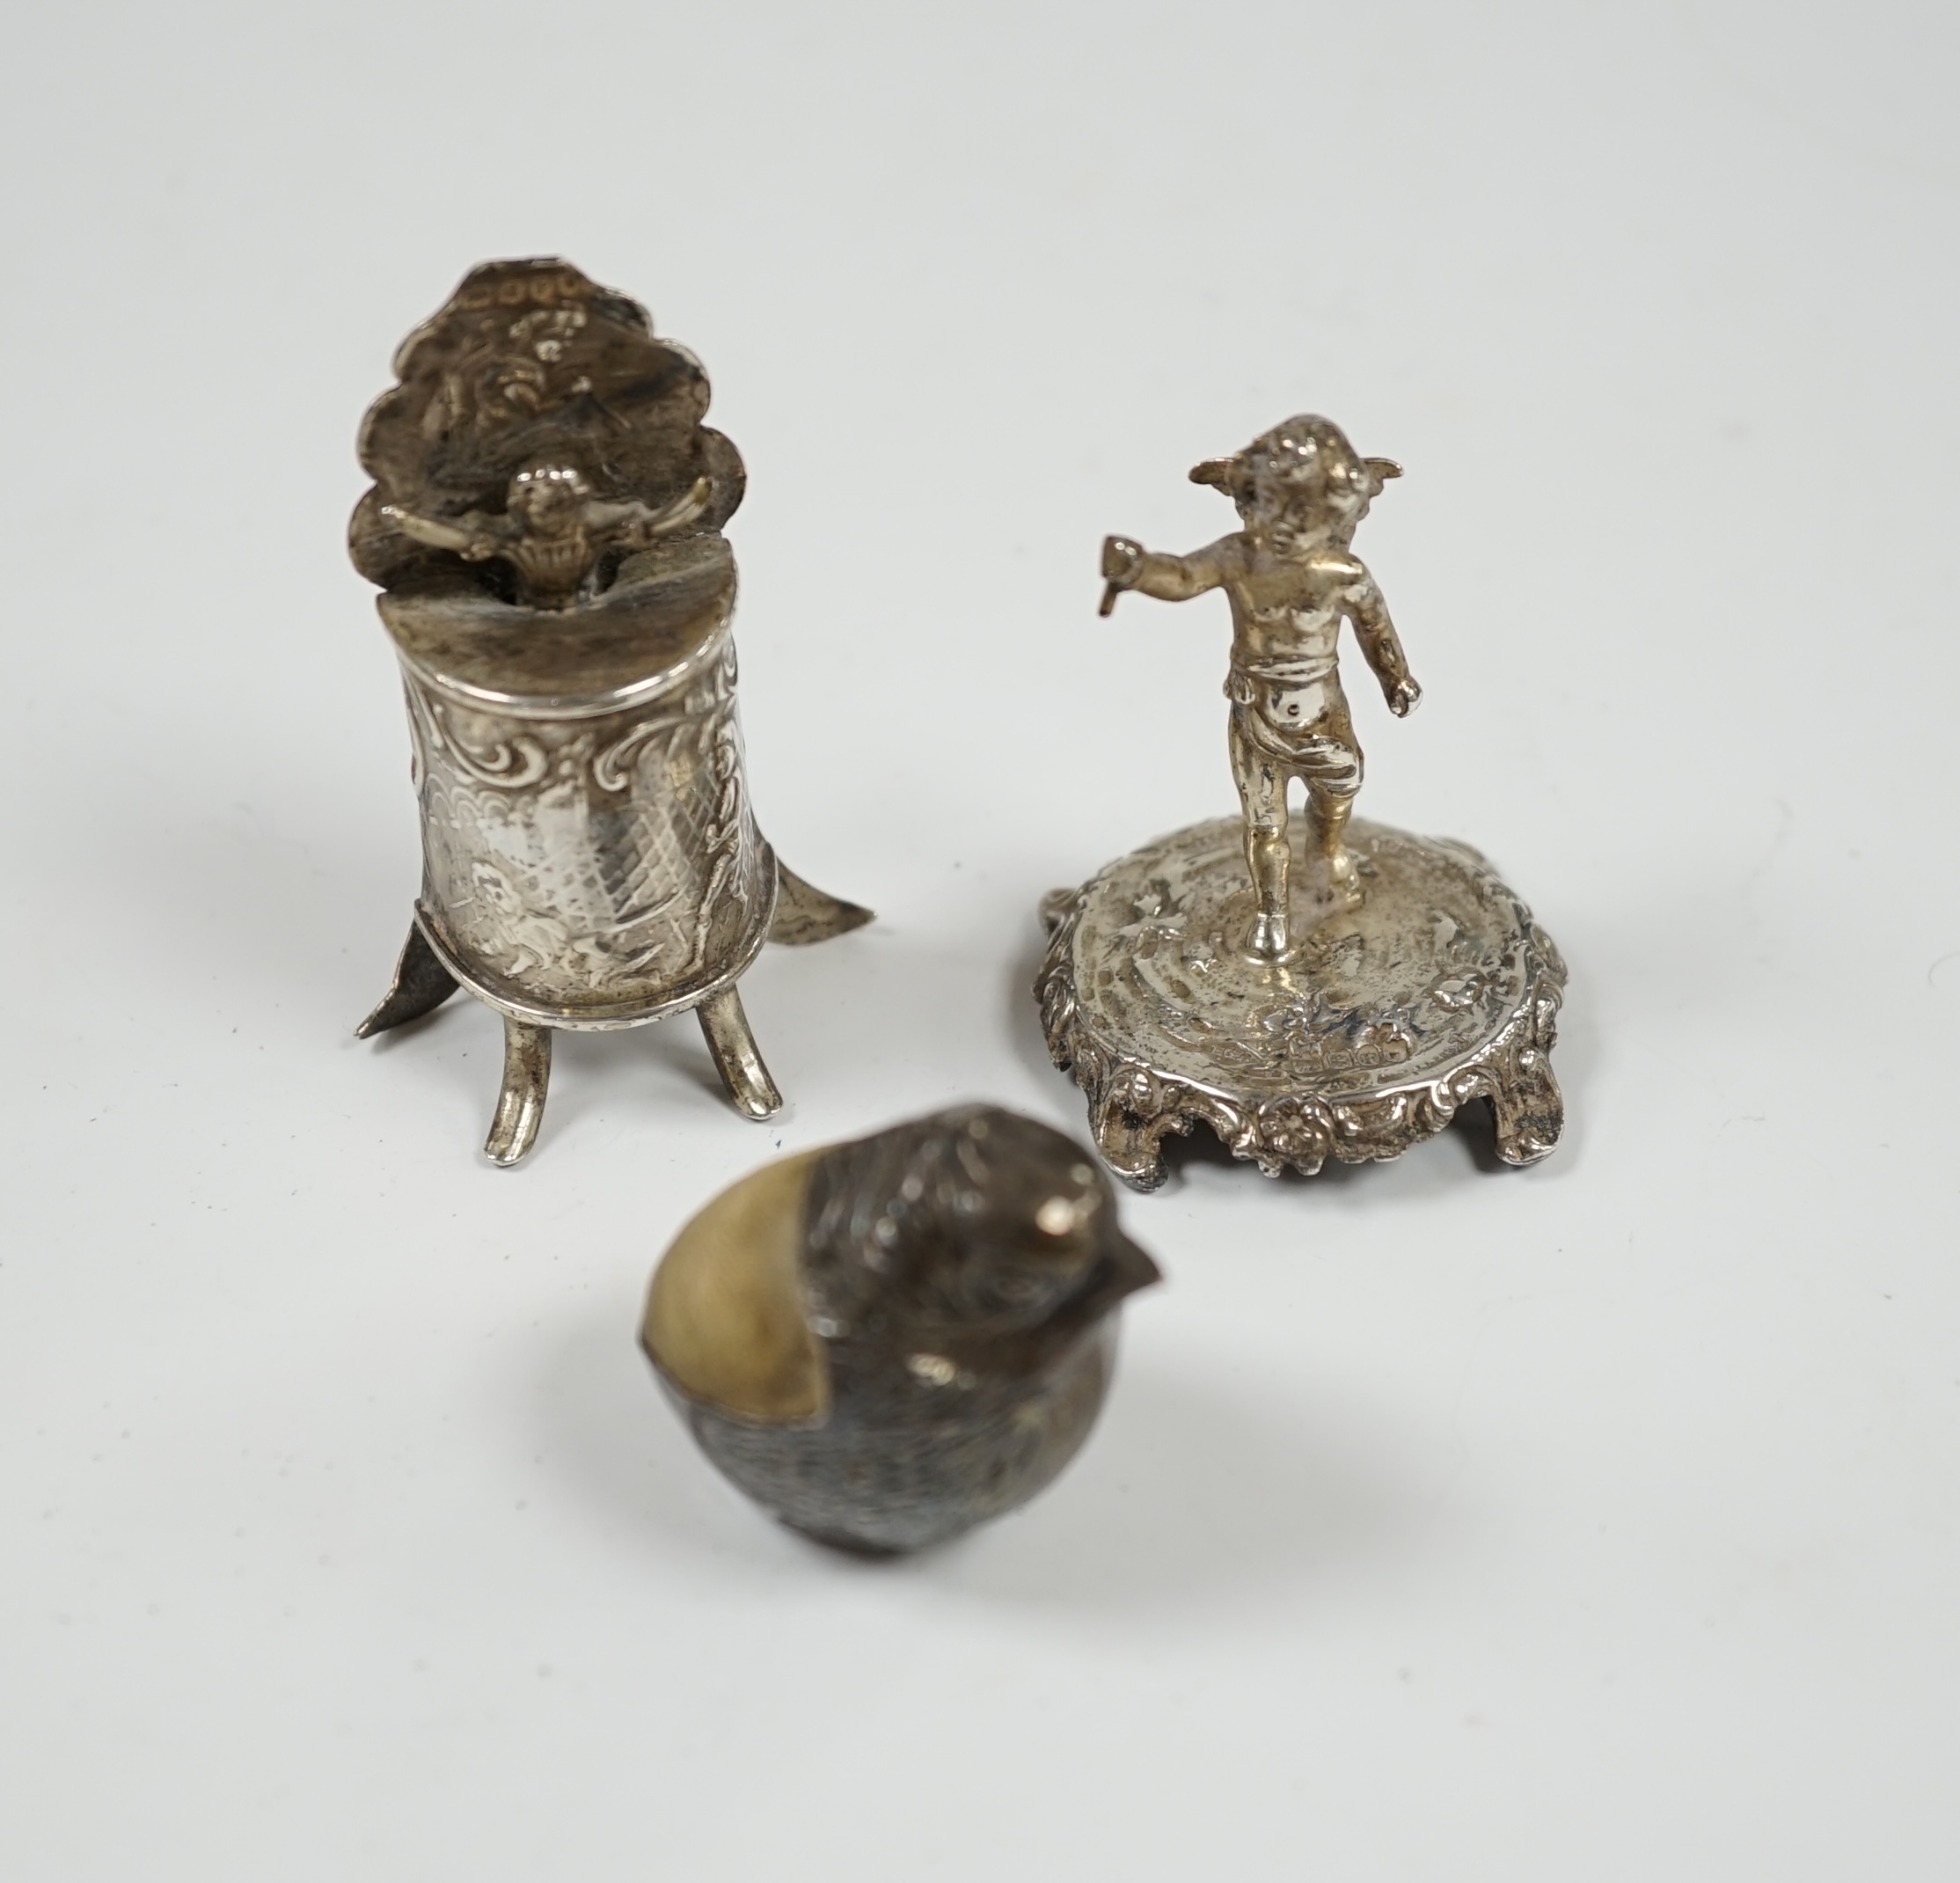 An Edwardian silver mounted 'hatching chick' pin cushion, by Sampson Mordan & Co, Chester, 1908, 29mm, together with two miniature silver groups with import marks. Condition - fair